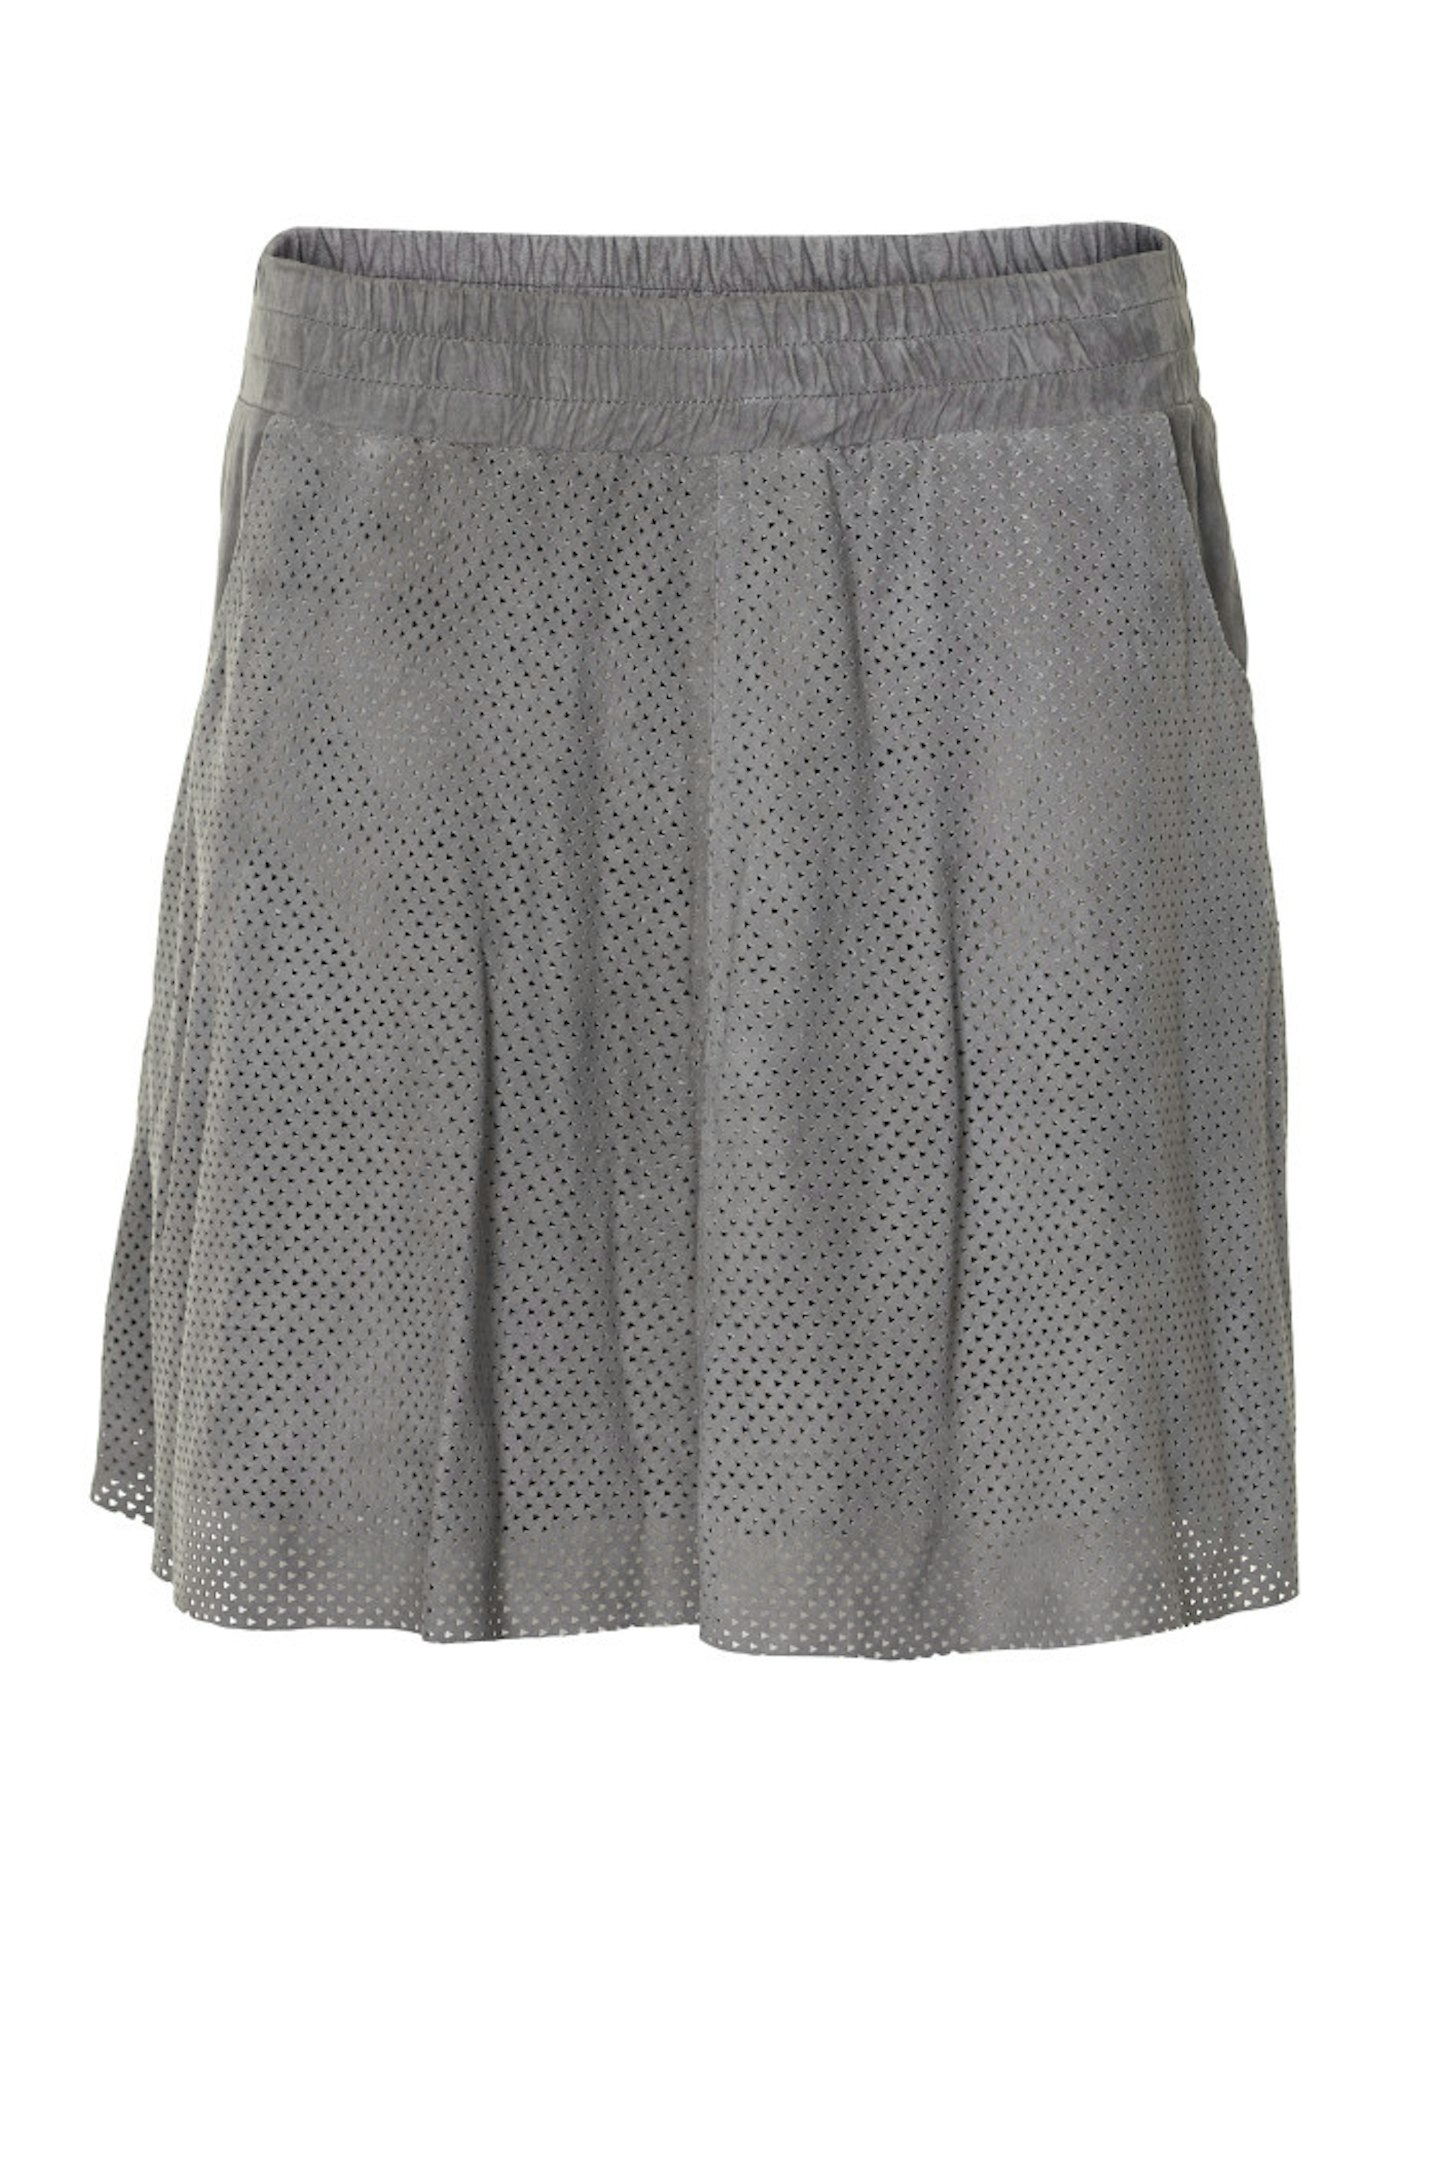 Gestuz Carrie Skirt, £169.00 available at flannels.com(2)